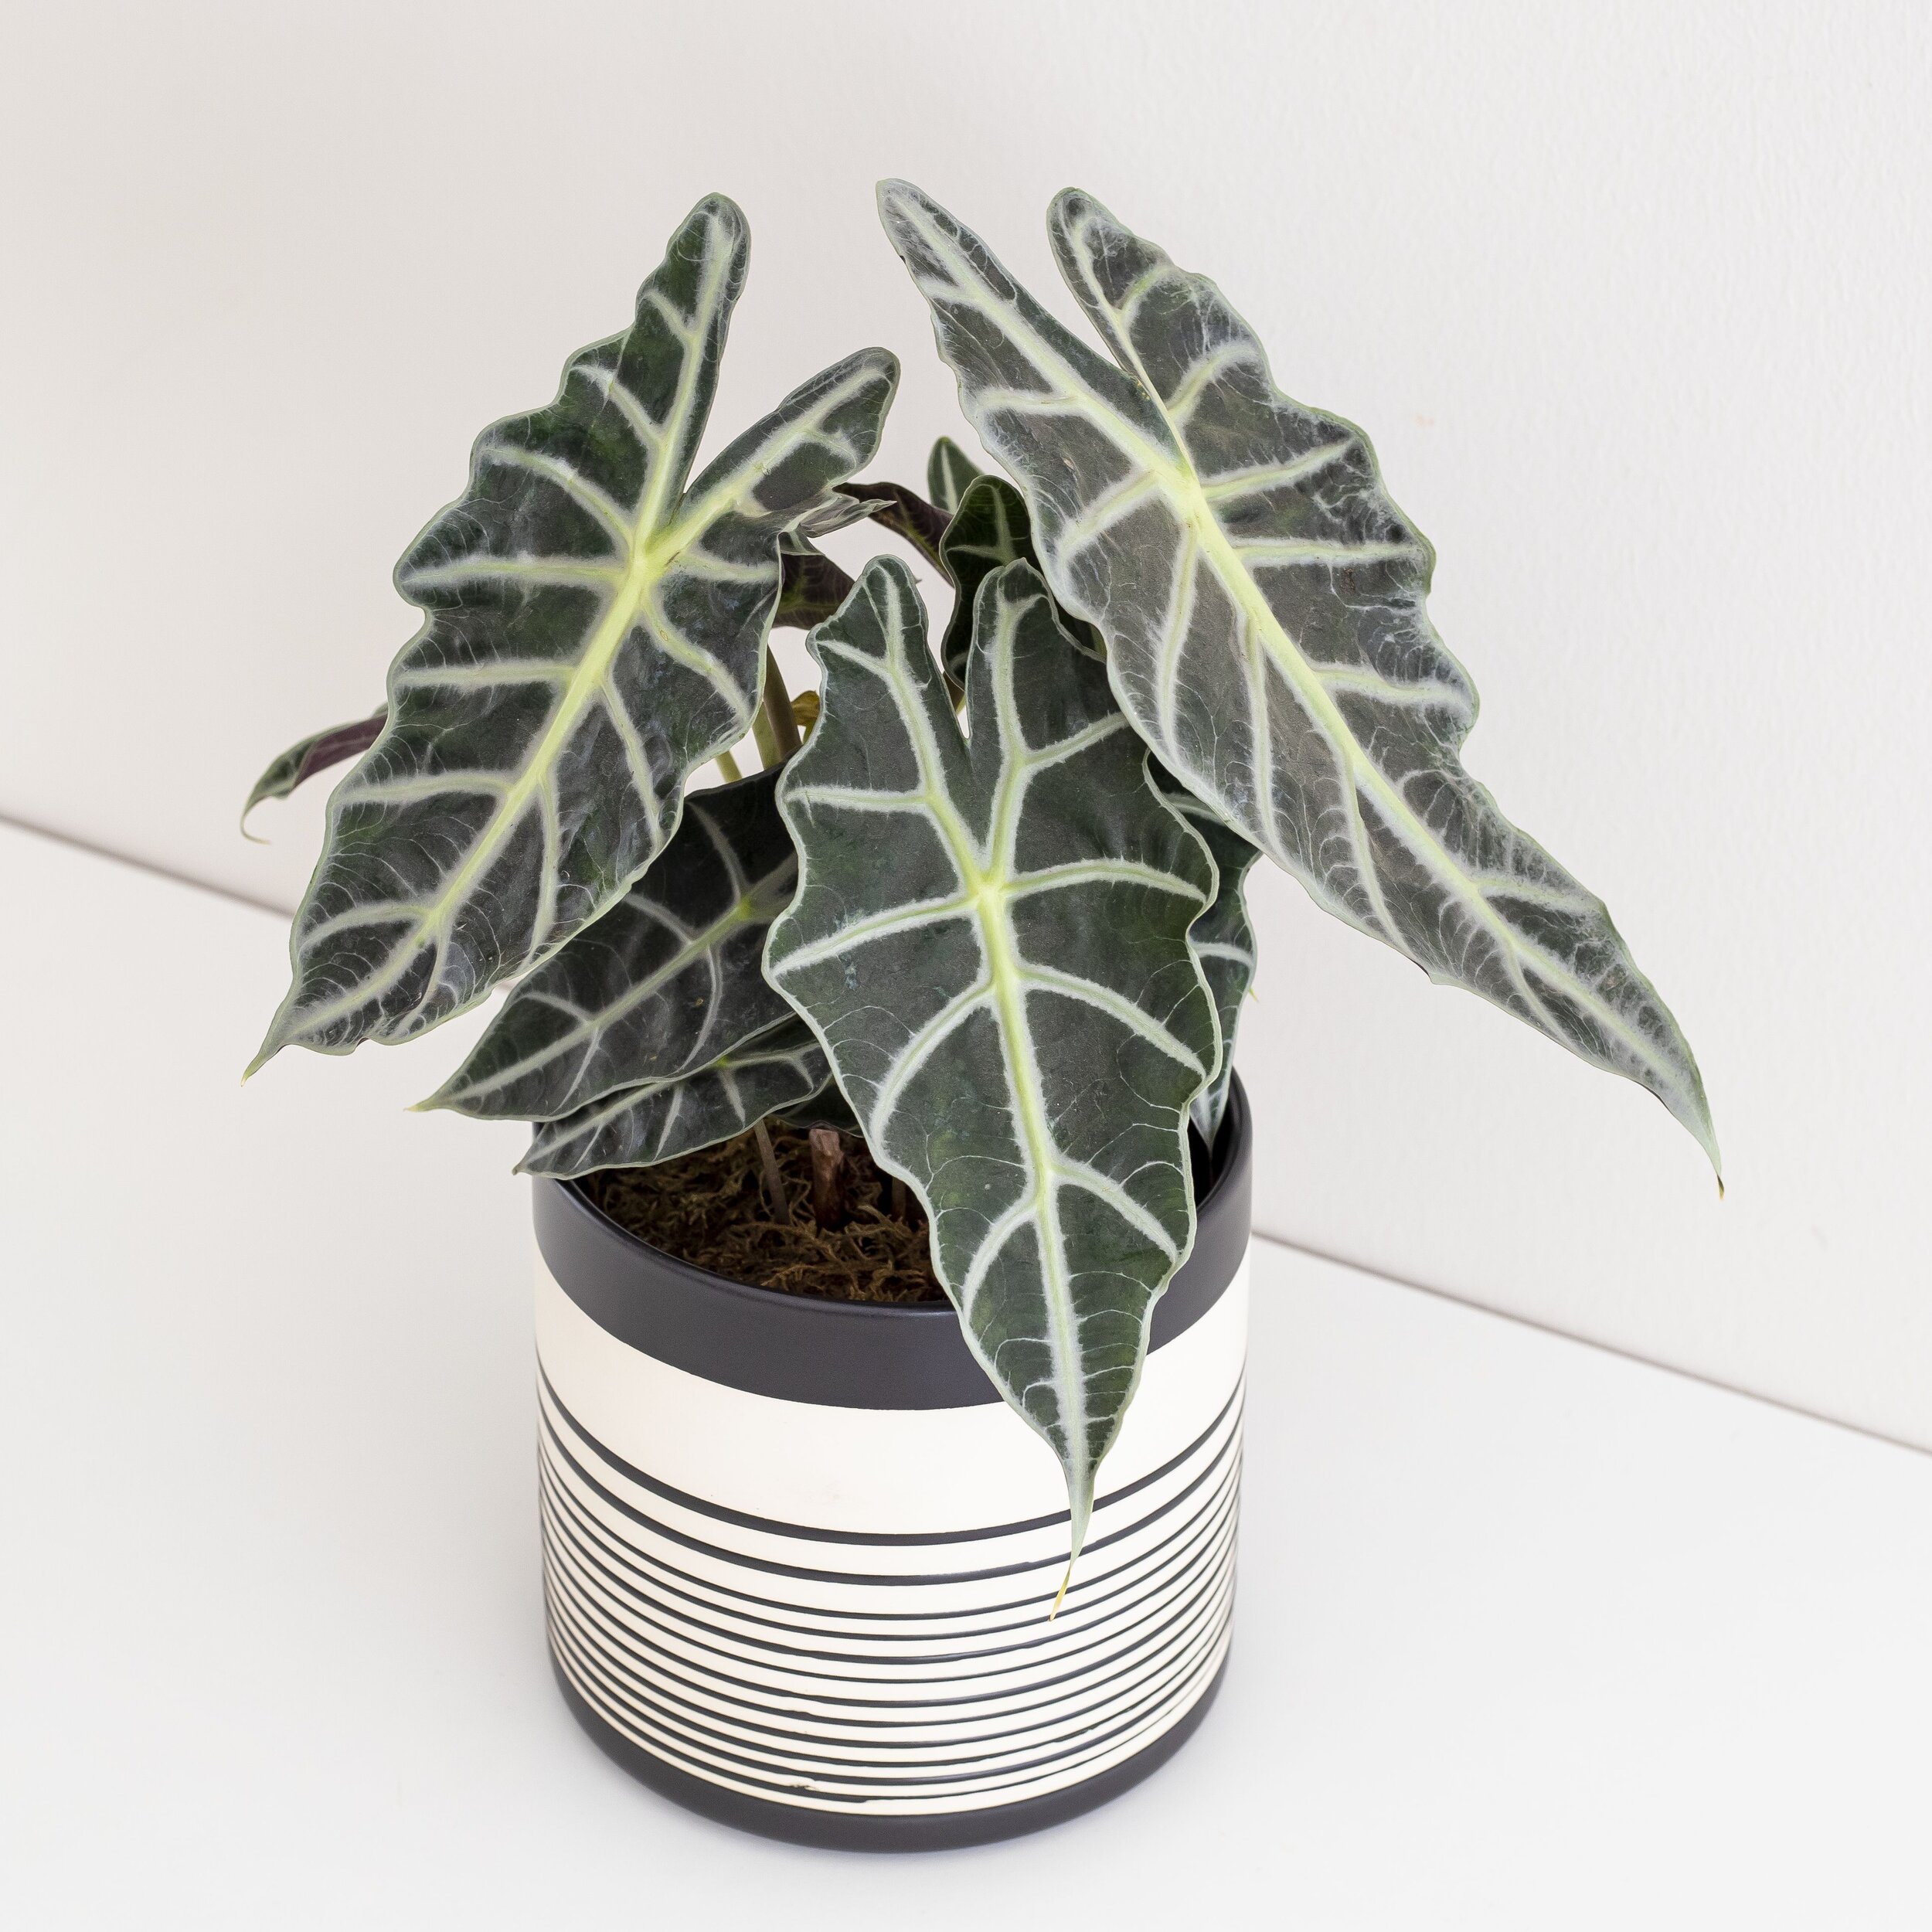 An Alocasia plant in a black and cream striped pot sitting on a white flat surface